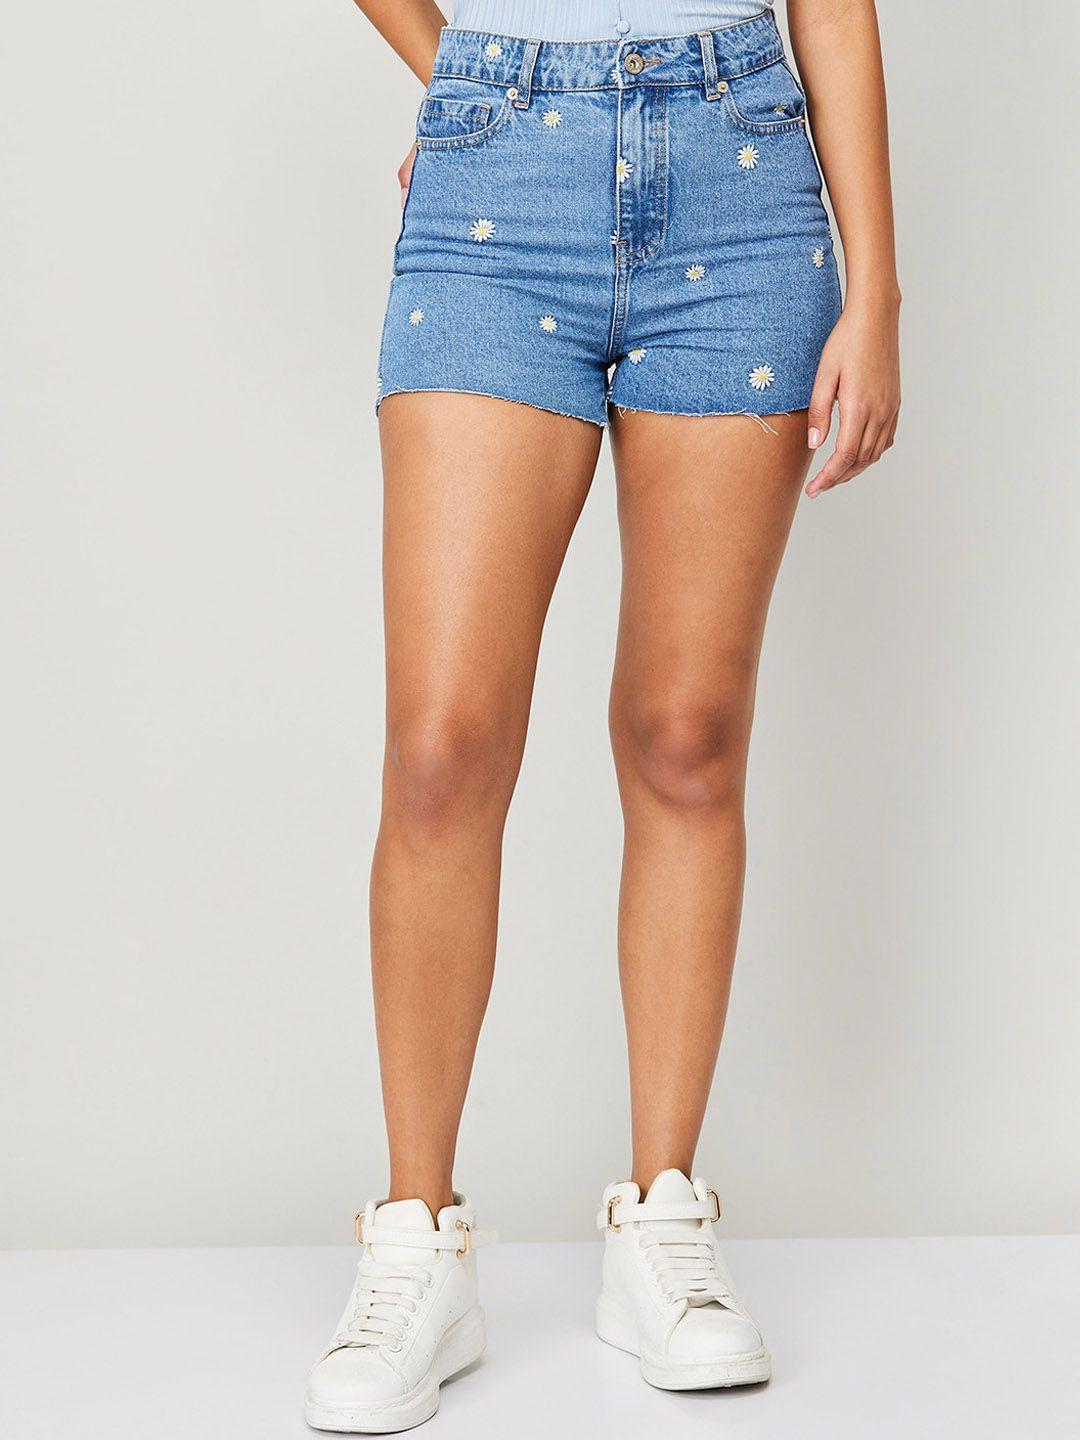 ginger by lifestyle women washed printed denim shorts